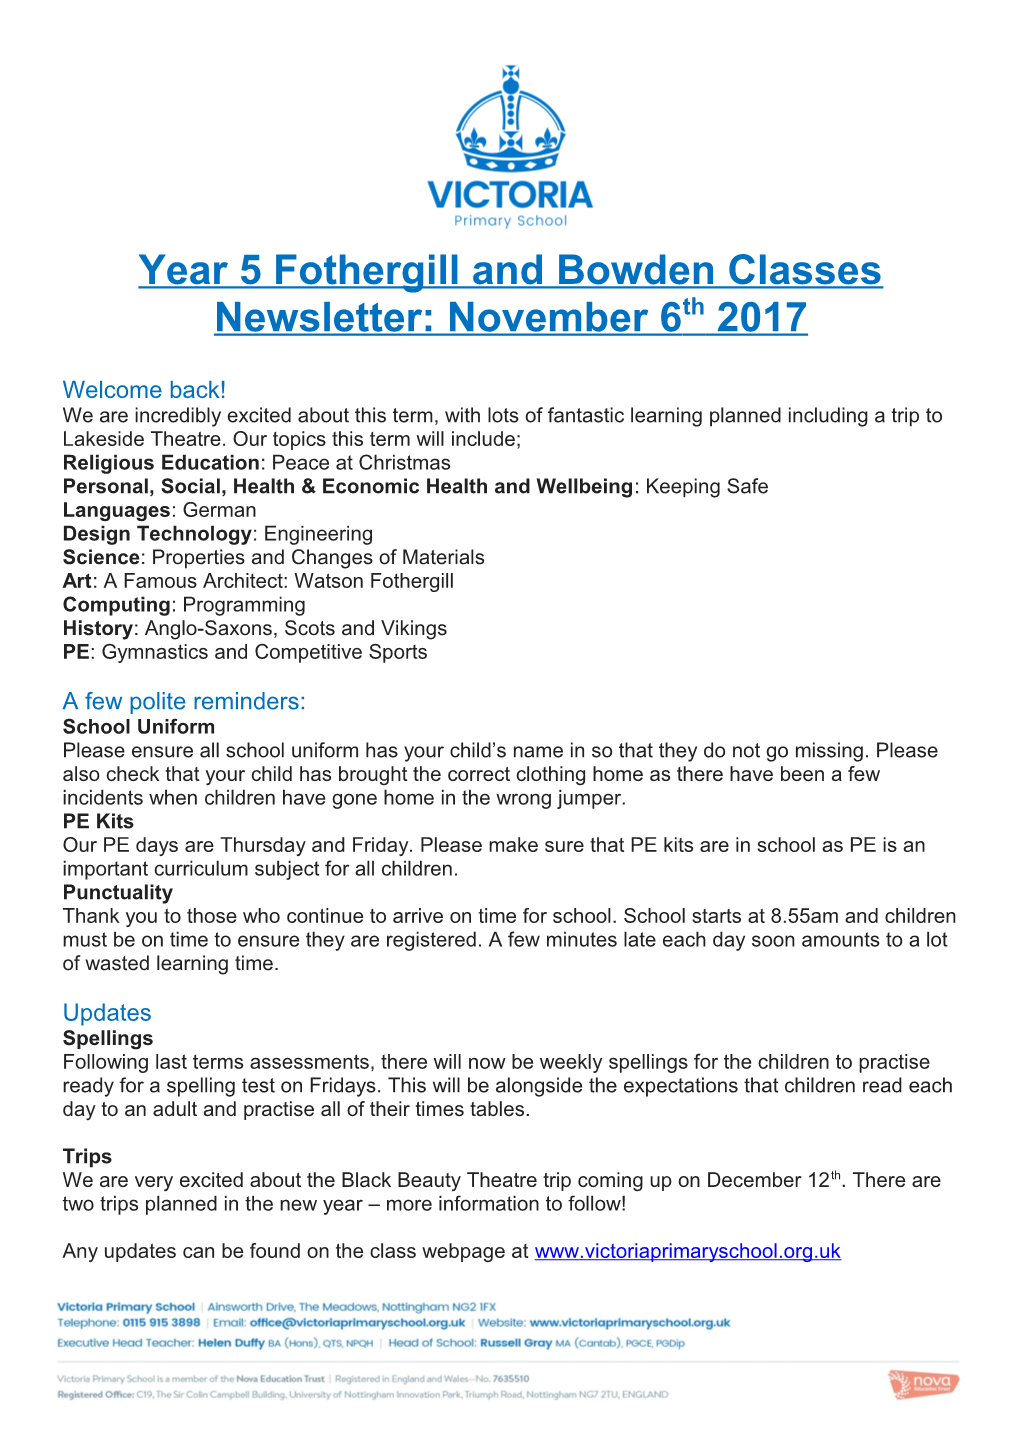 Year 5 Fothergill and Bowden Classes Newsletter: November 6Th 2017